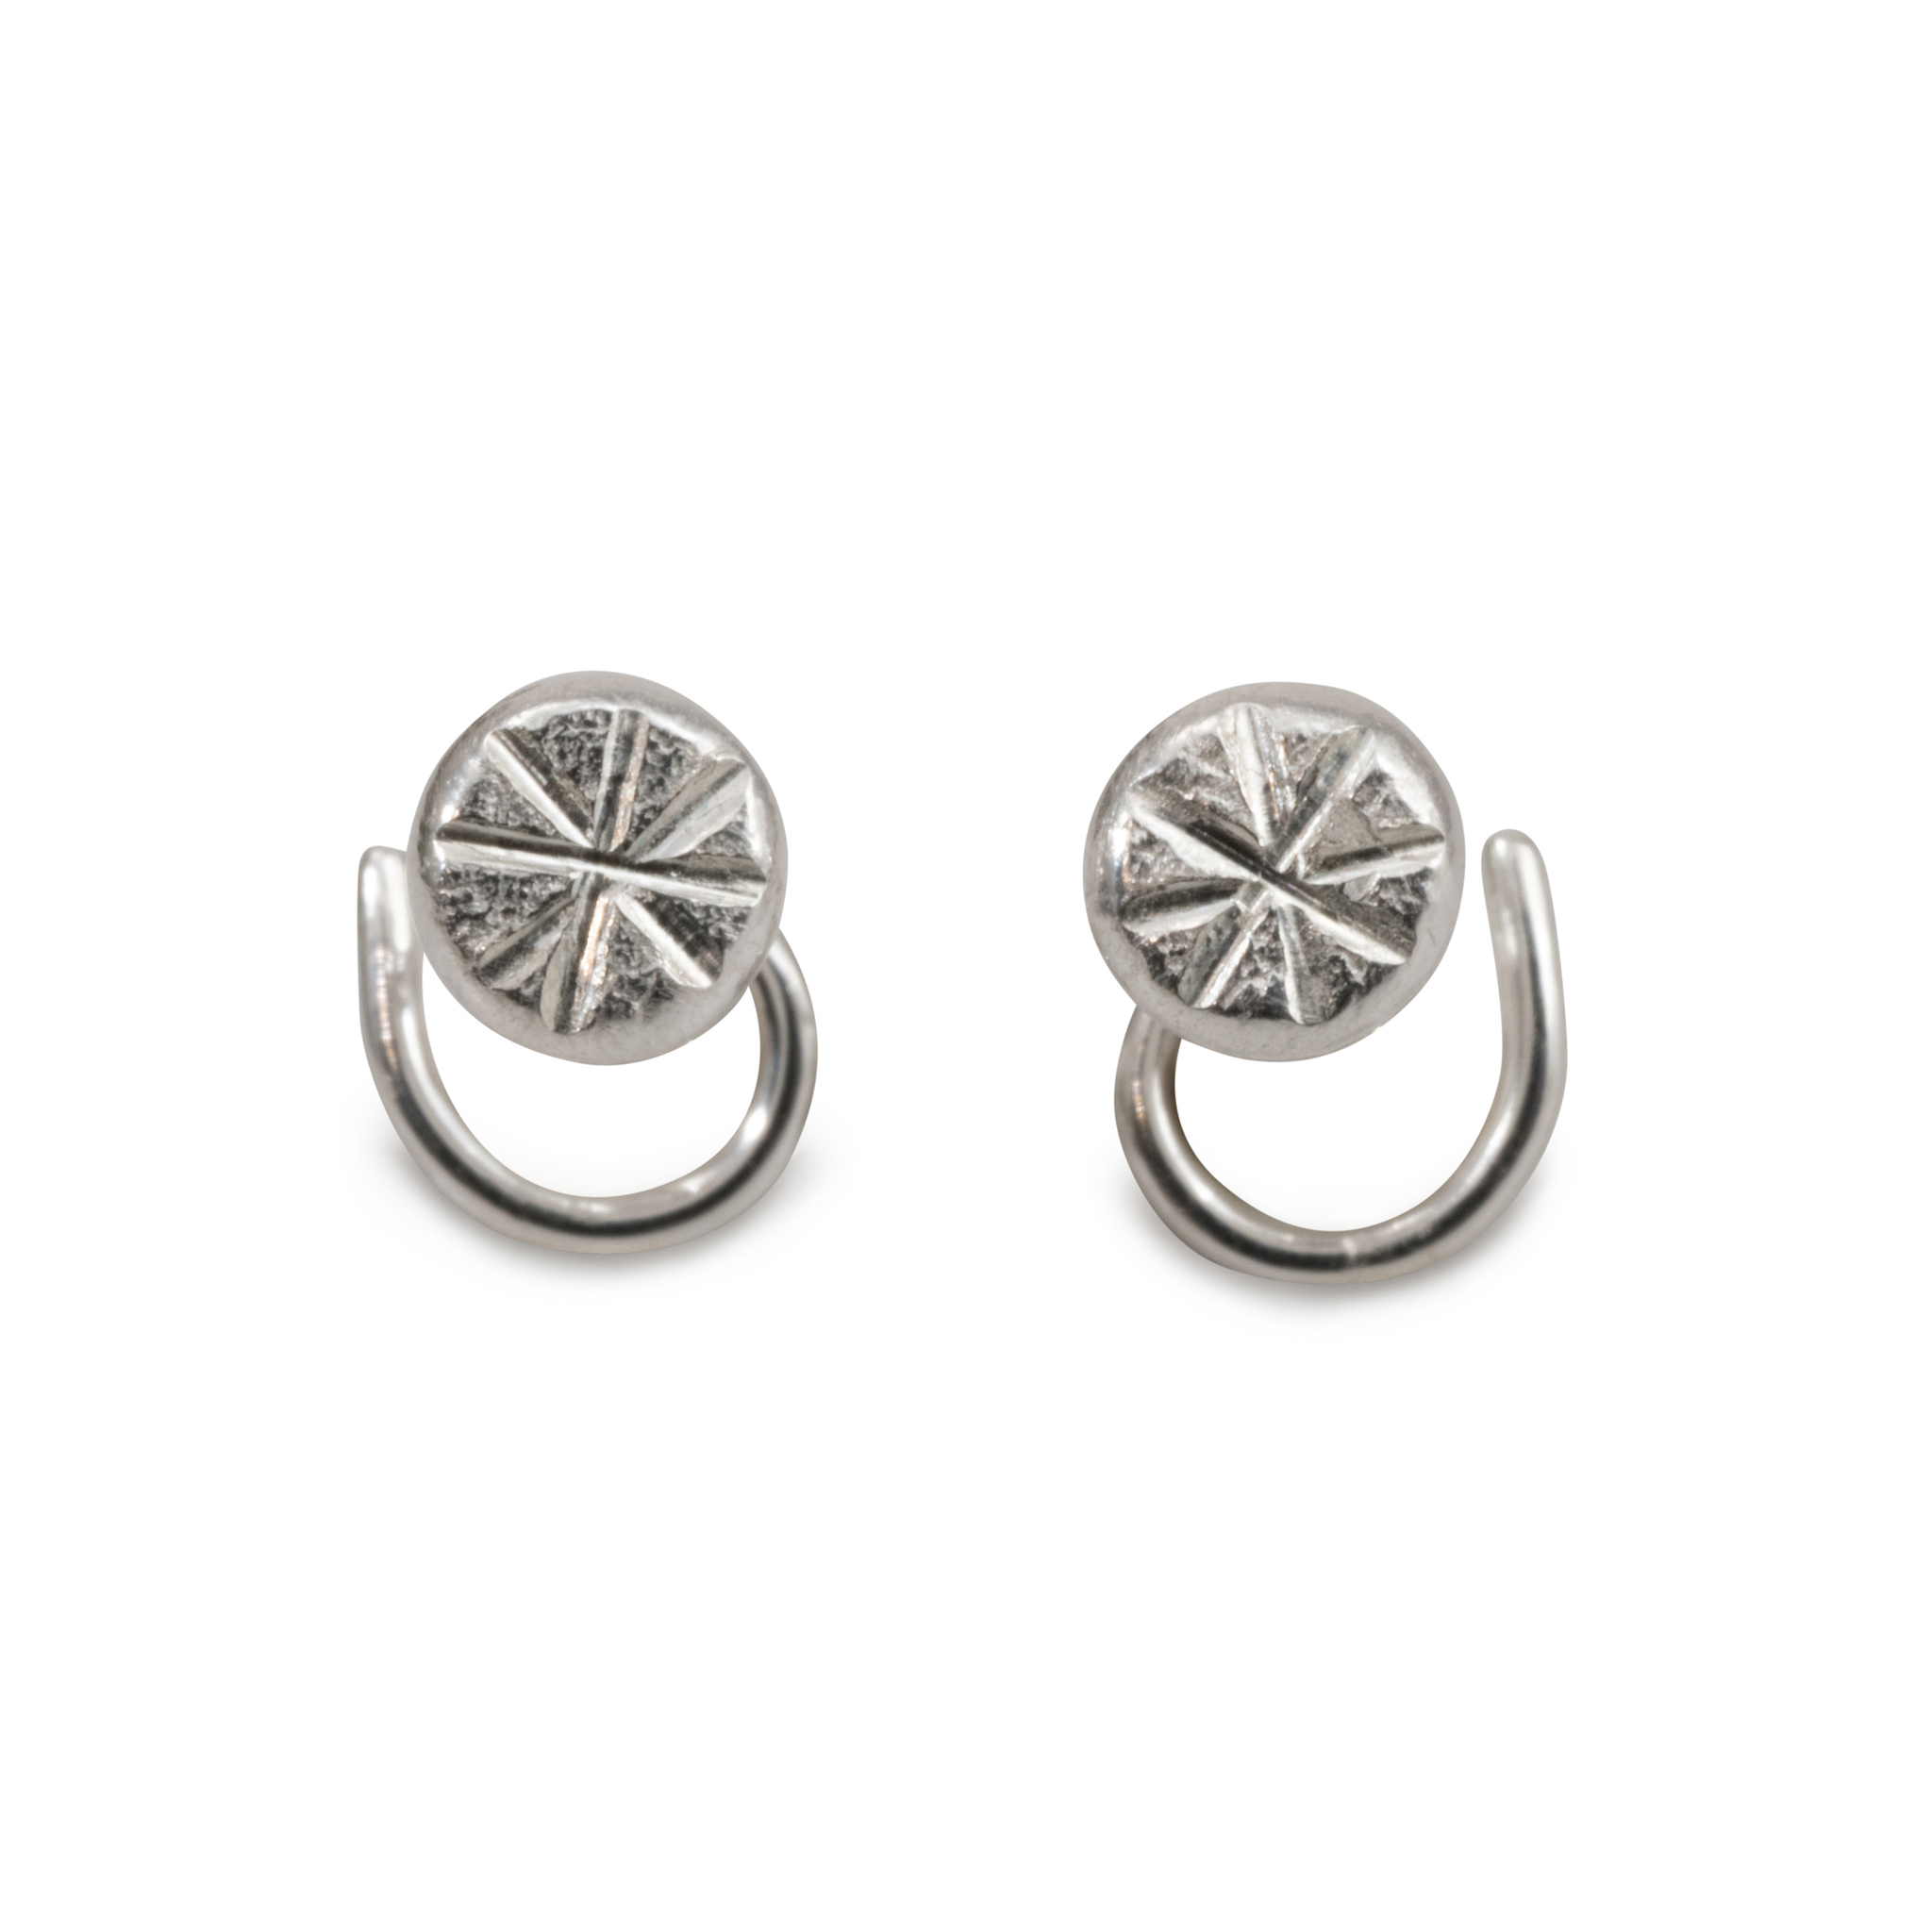 Stella Comfort Earrings in Recycled Silver